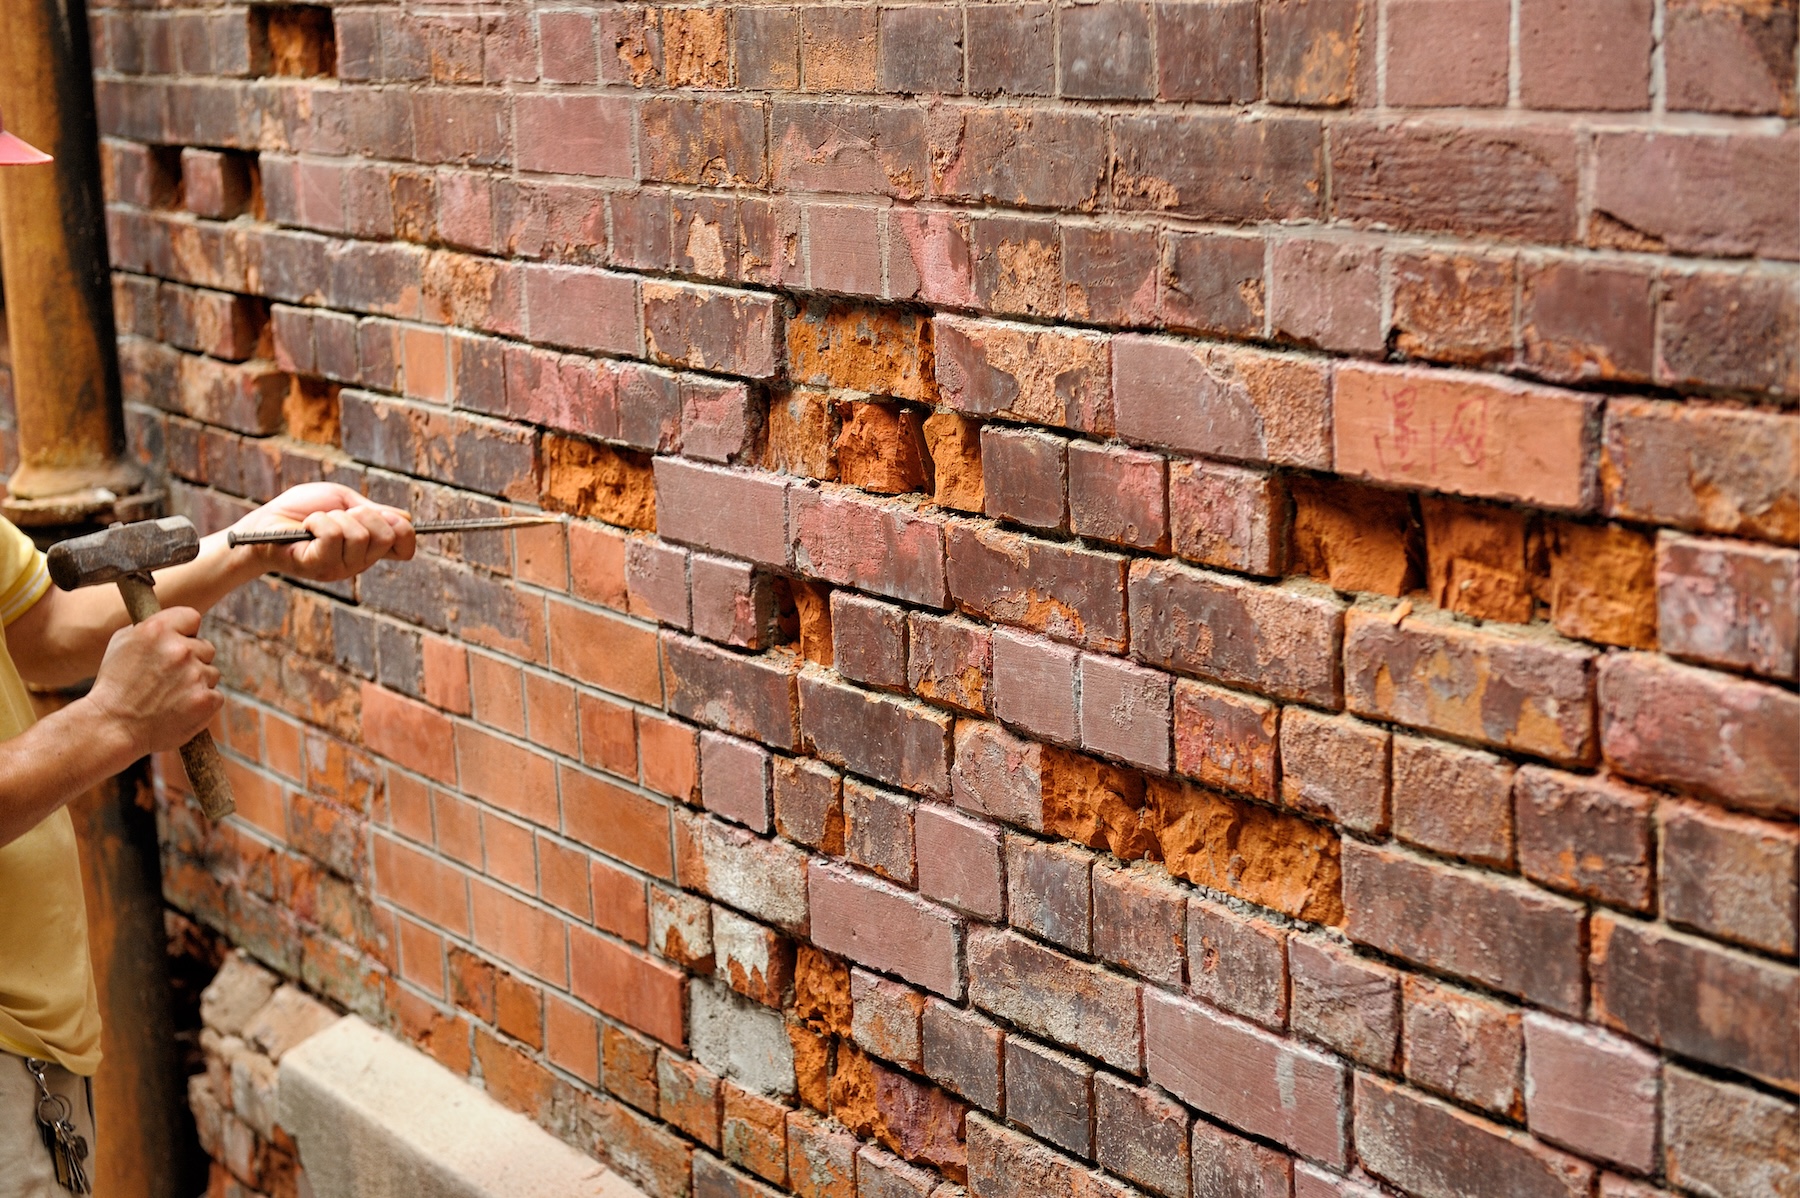 Brick and Stone Flat Work Repair on cracked wall